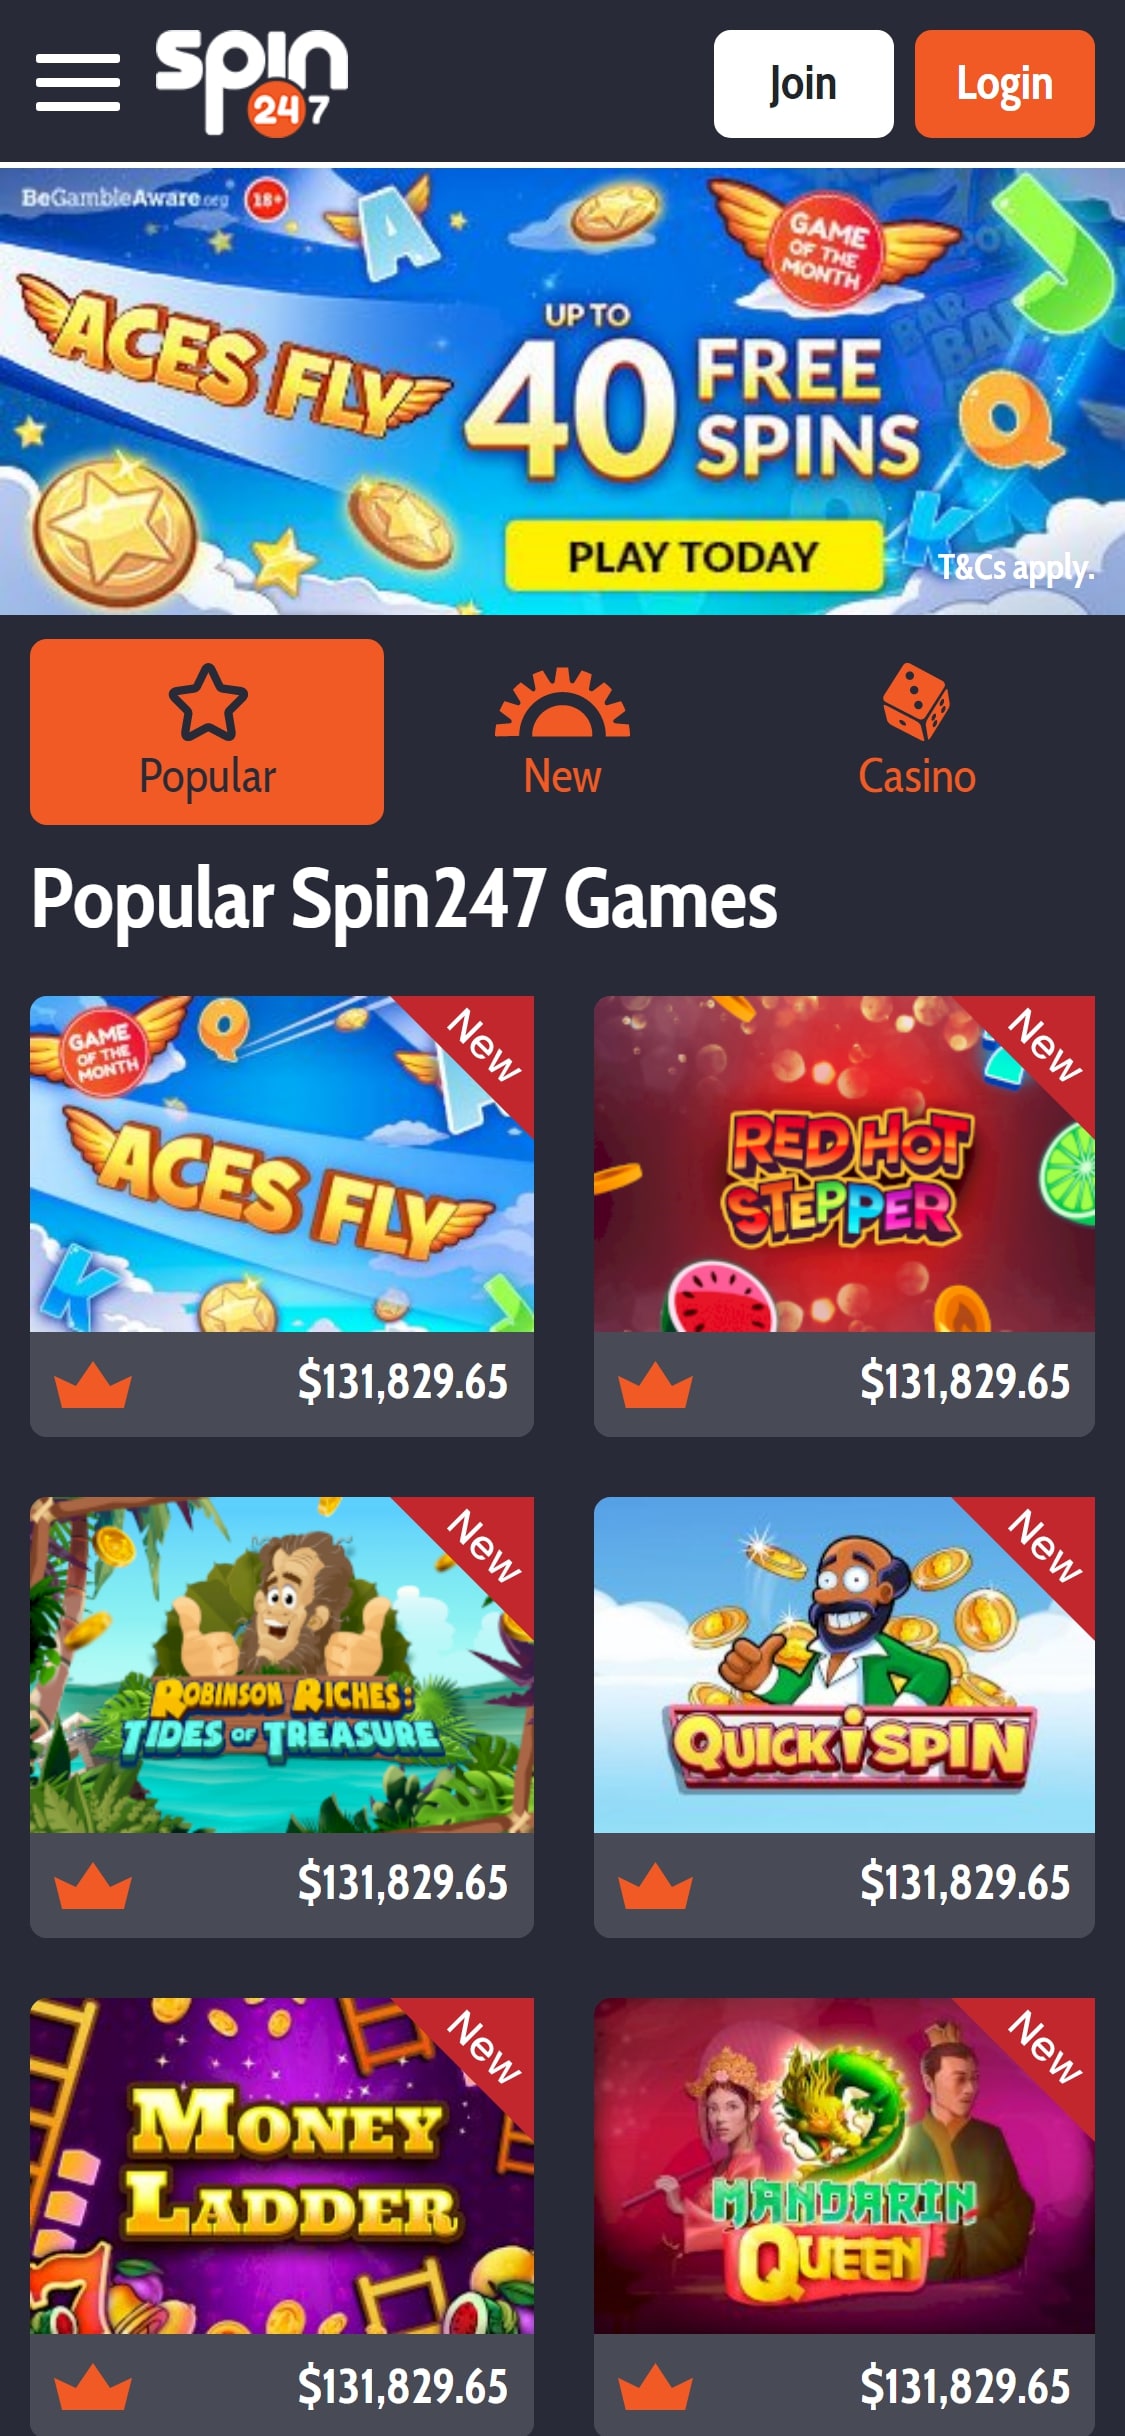 Spin247 Casino Mobile Review